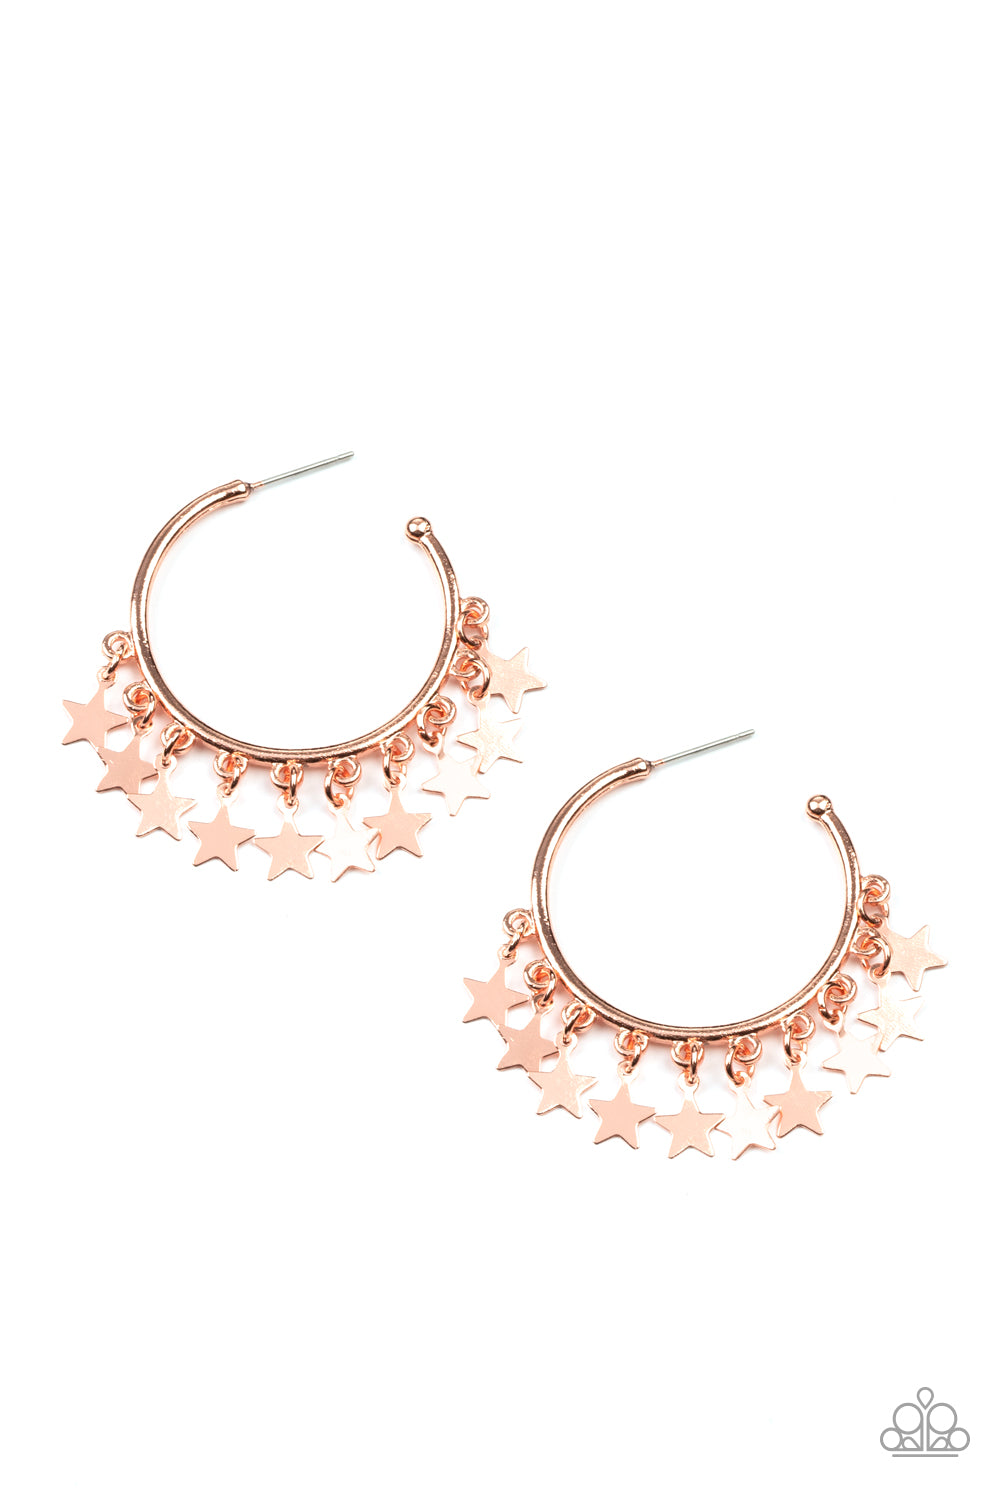 five-dollar-jewelry-happy-independence-day-copper-earrings-paparazzi-accessories